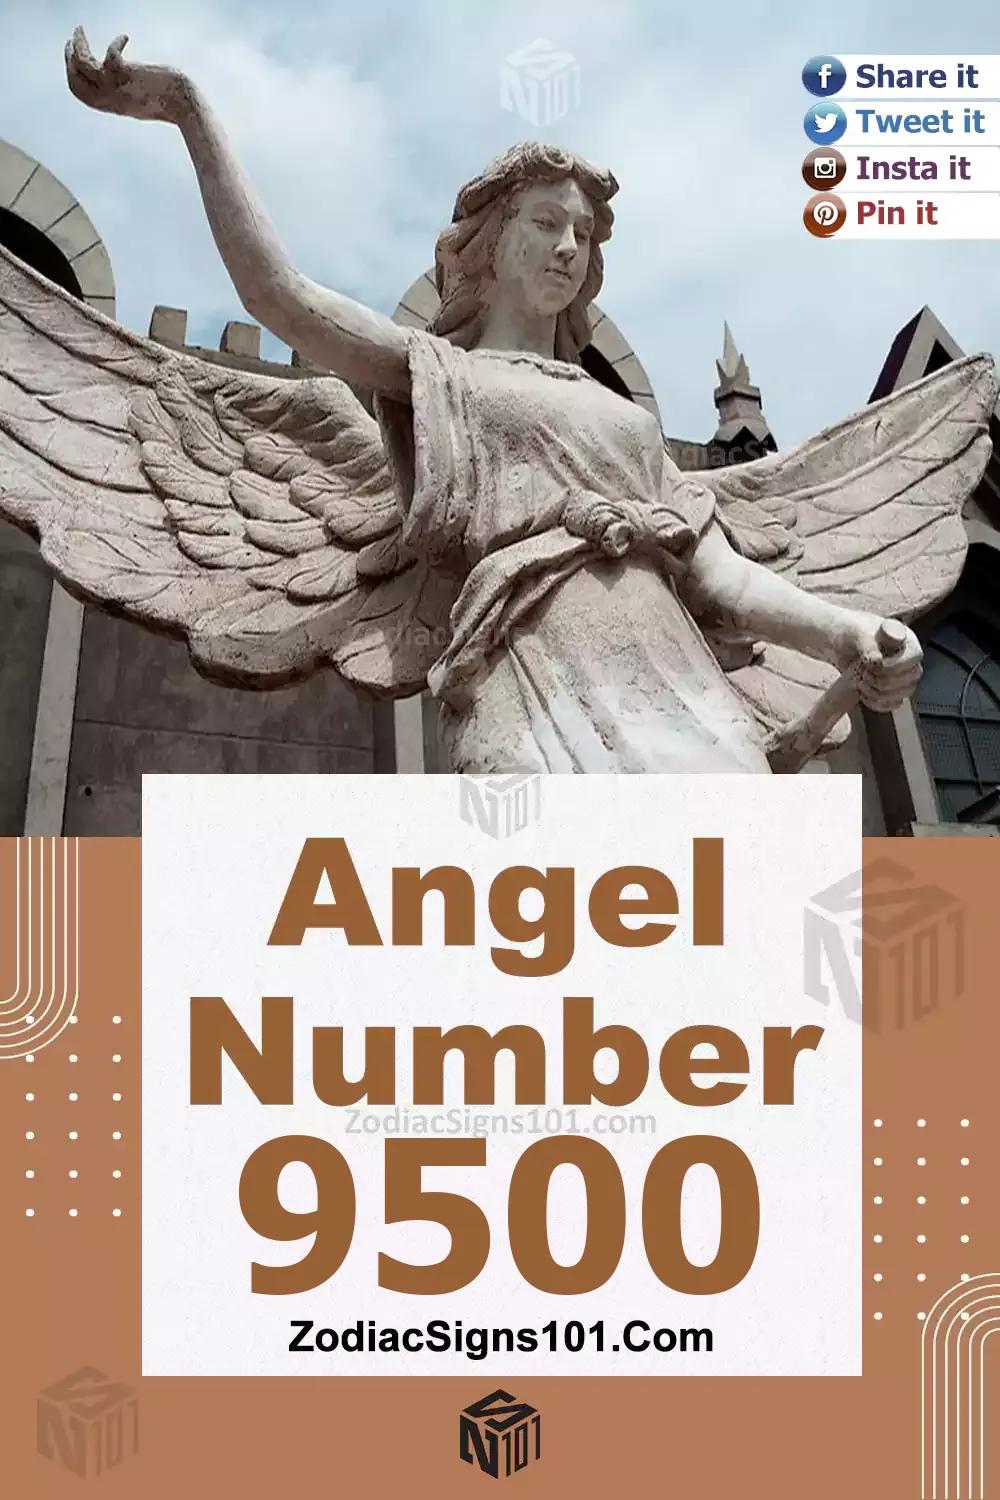 9500 Angel Number Meaning